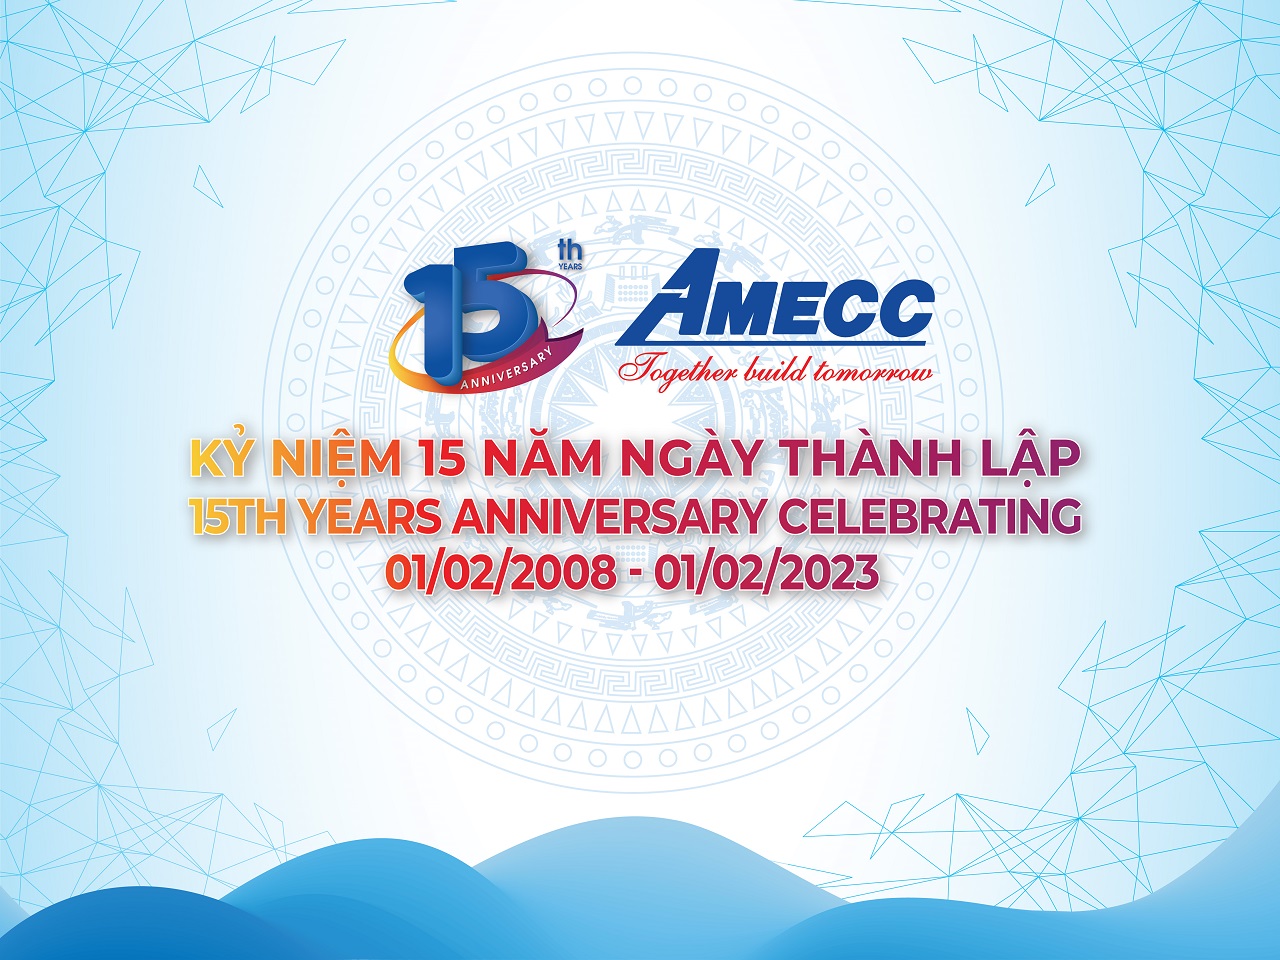 Letter of thanks on the occasion of the 15th anniversary of the establishment of AMECC JSC